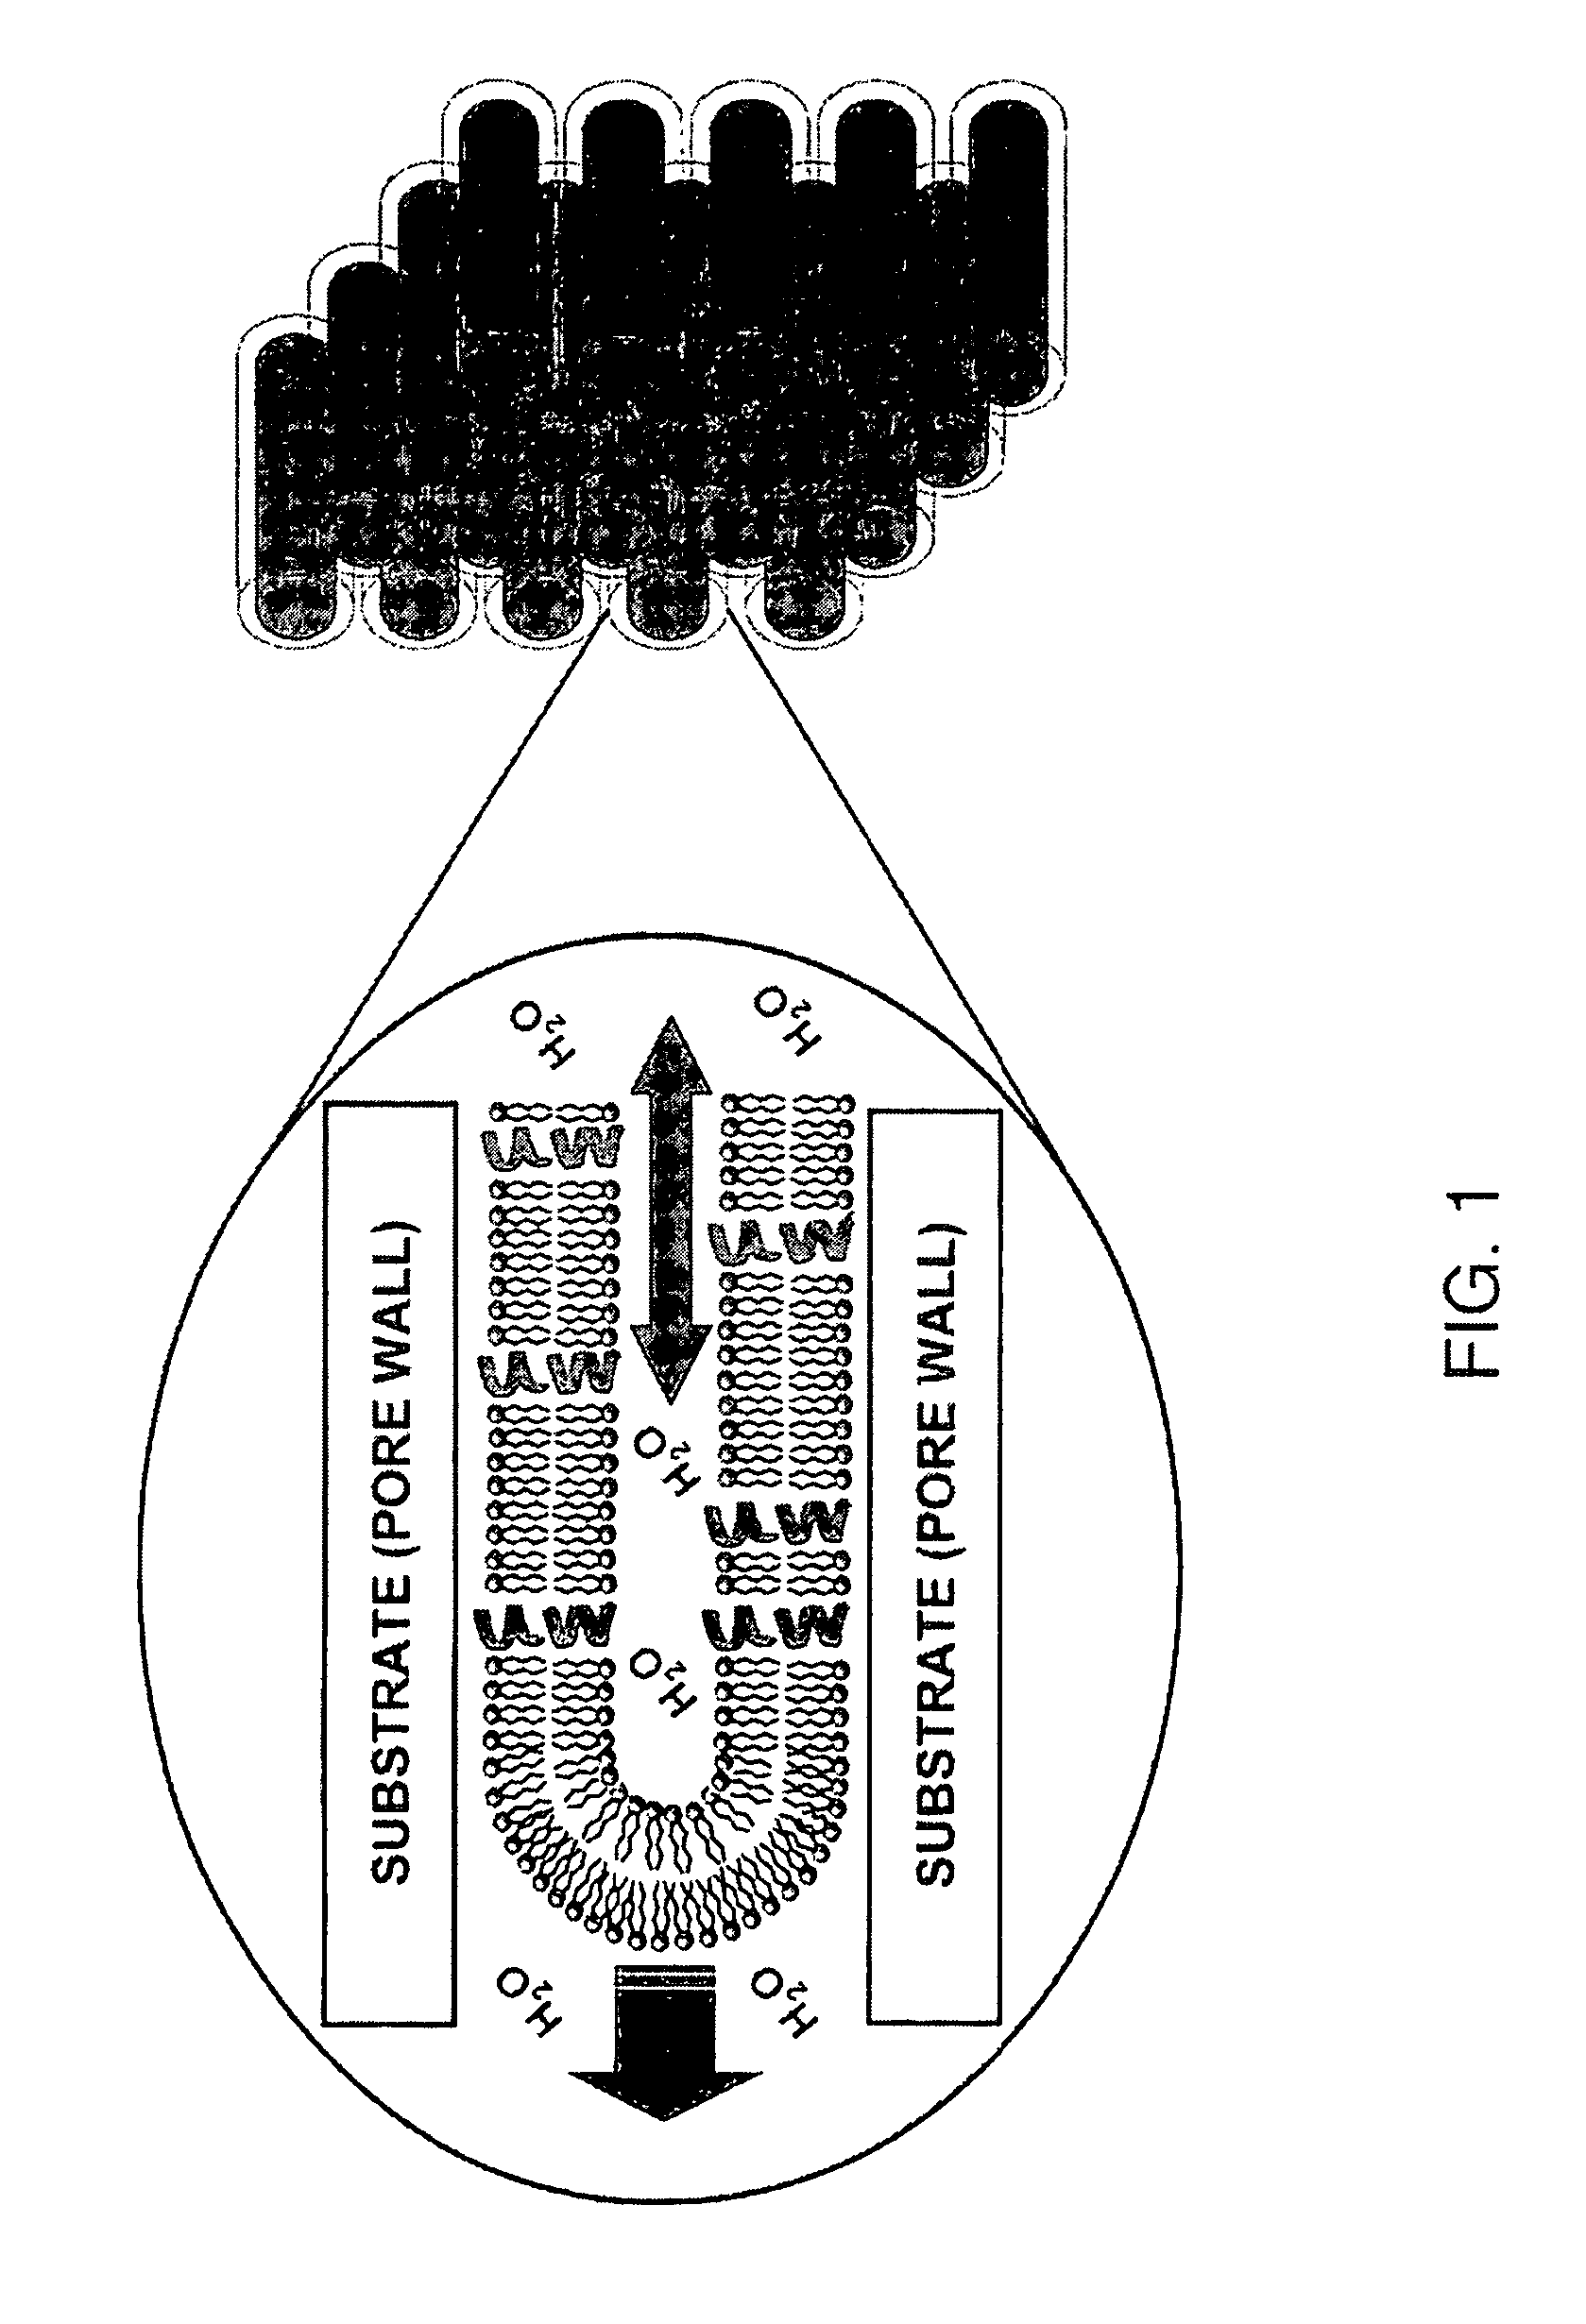 Solid state NMR method for screening cell membrane protein binding drug candidates